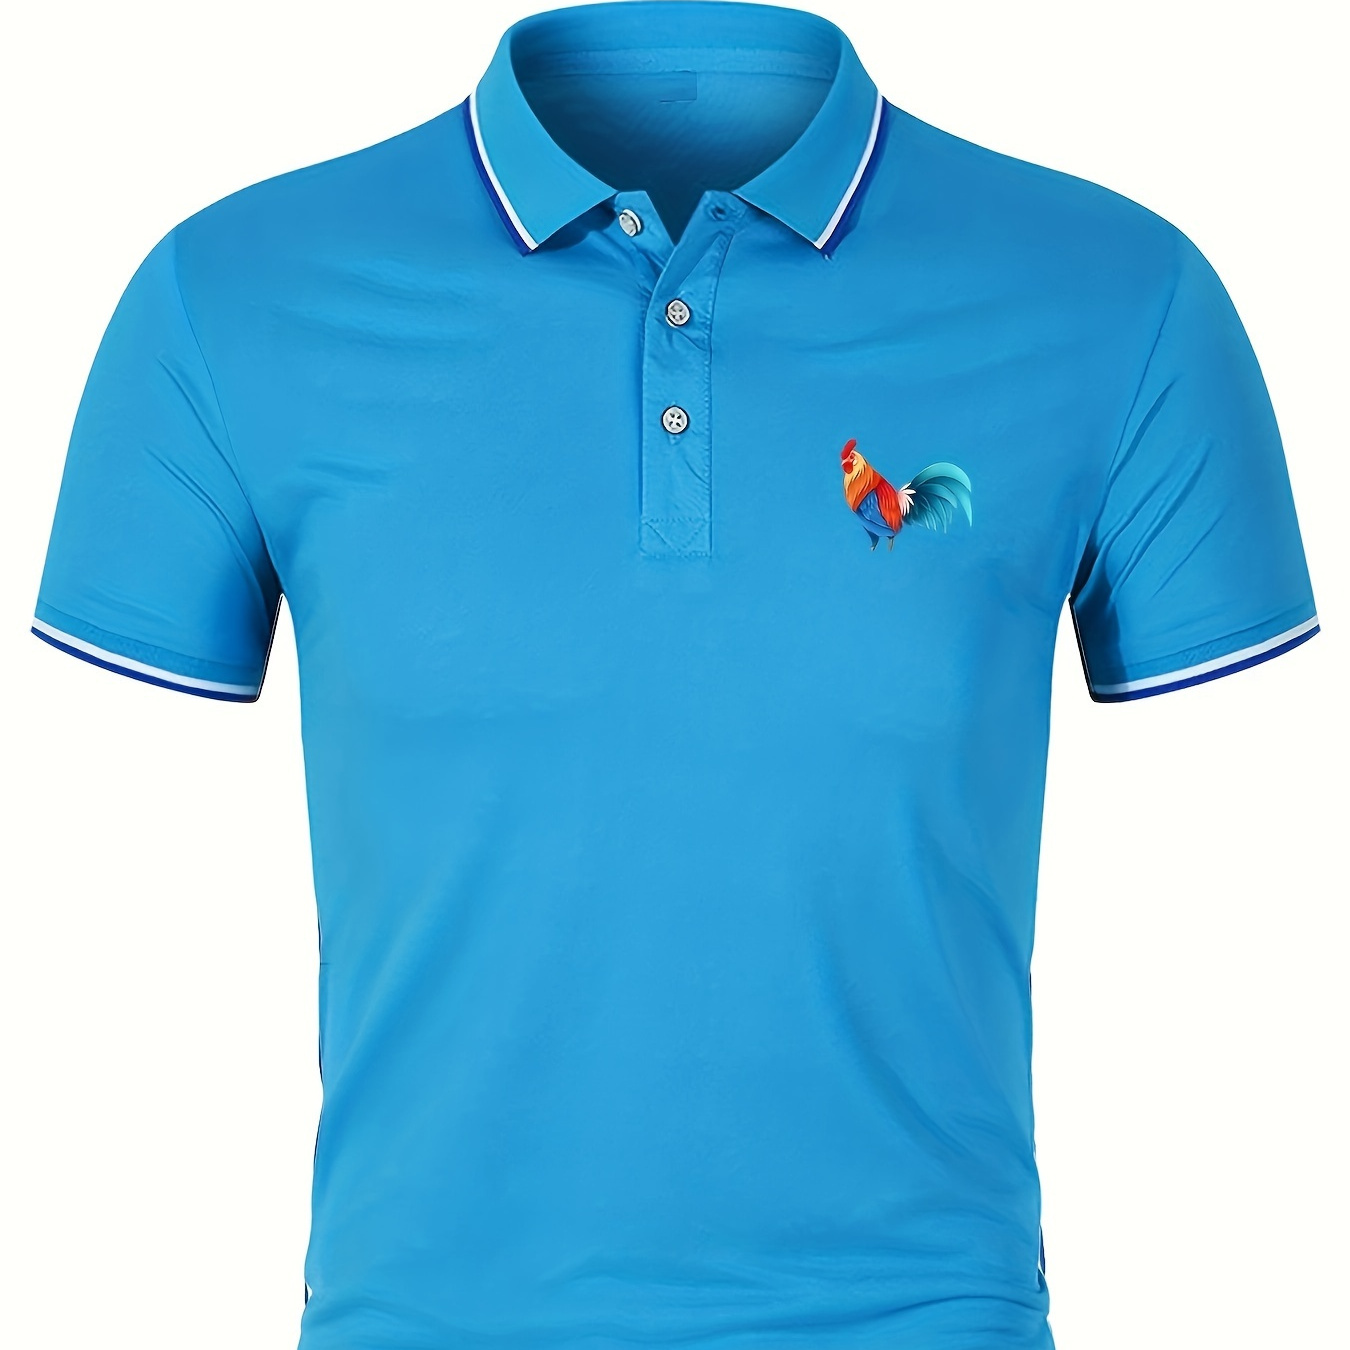 

Men's Golf Shirt, Colorful Rooster Print Short Sleeve Breathable Tennis Shirt, Business Casual, Moisture Wicking